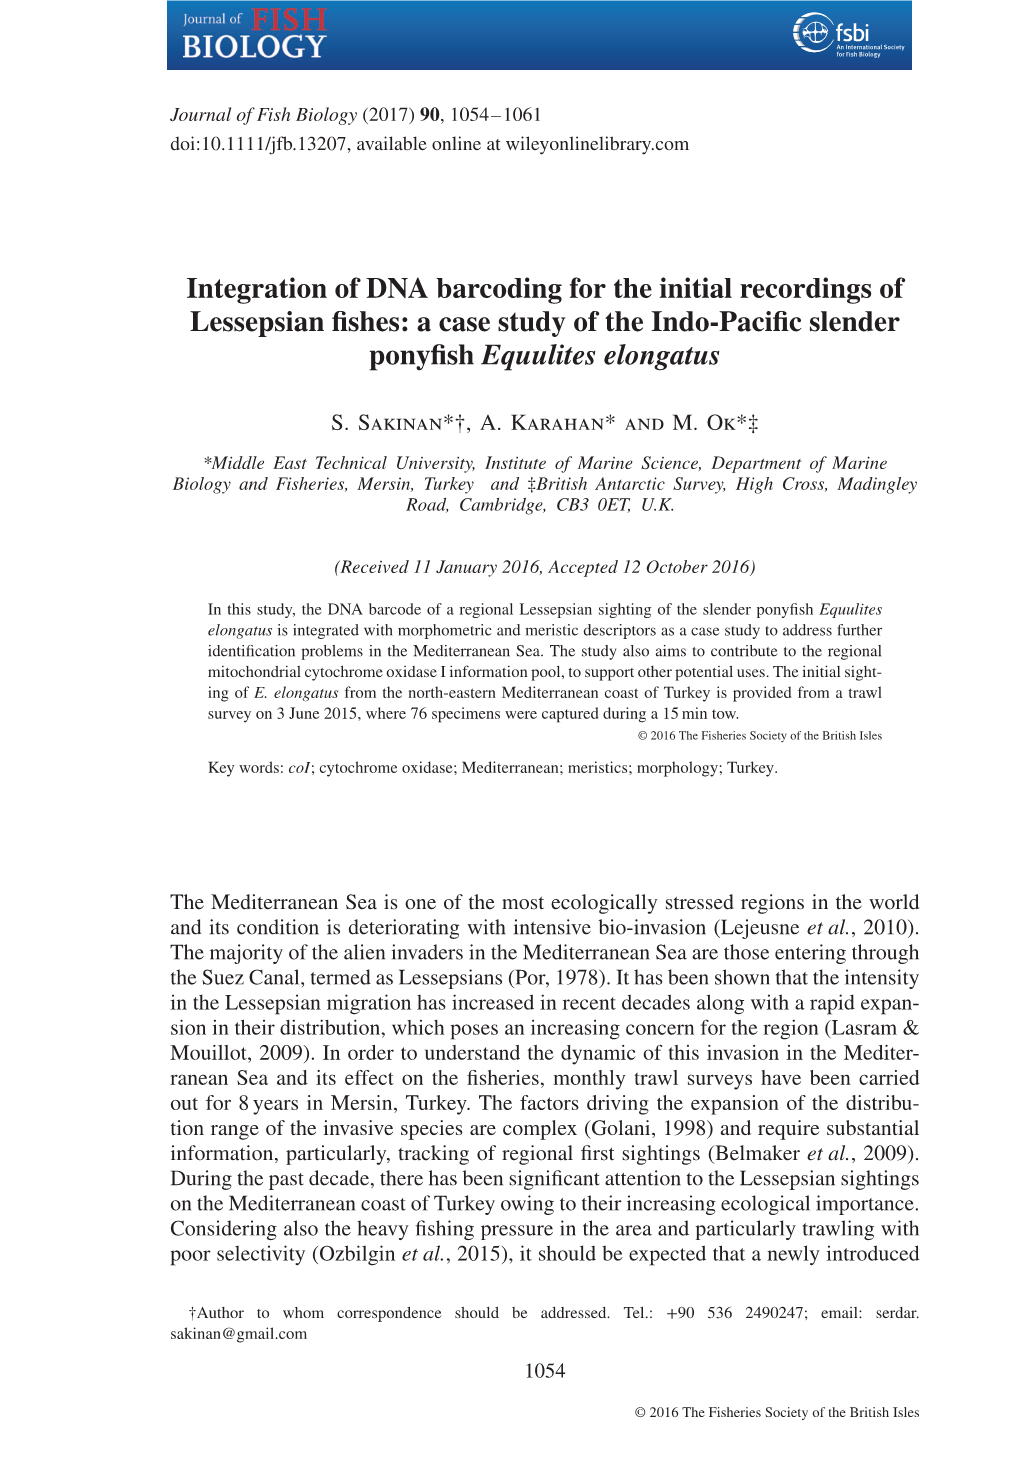 Integration of DNA Barcoding for the Initial Recordings of Lessepsian Fishes: a Case Study of the Indo-Pacific Slender Ponyfish Equulites Elongatus